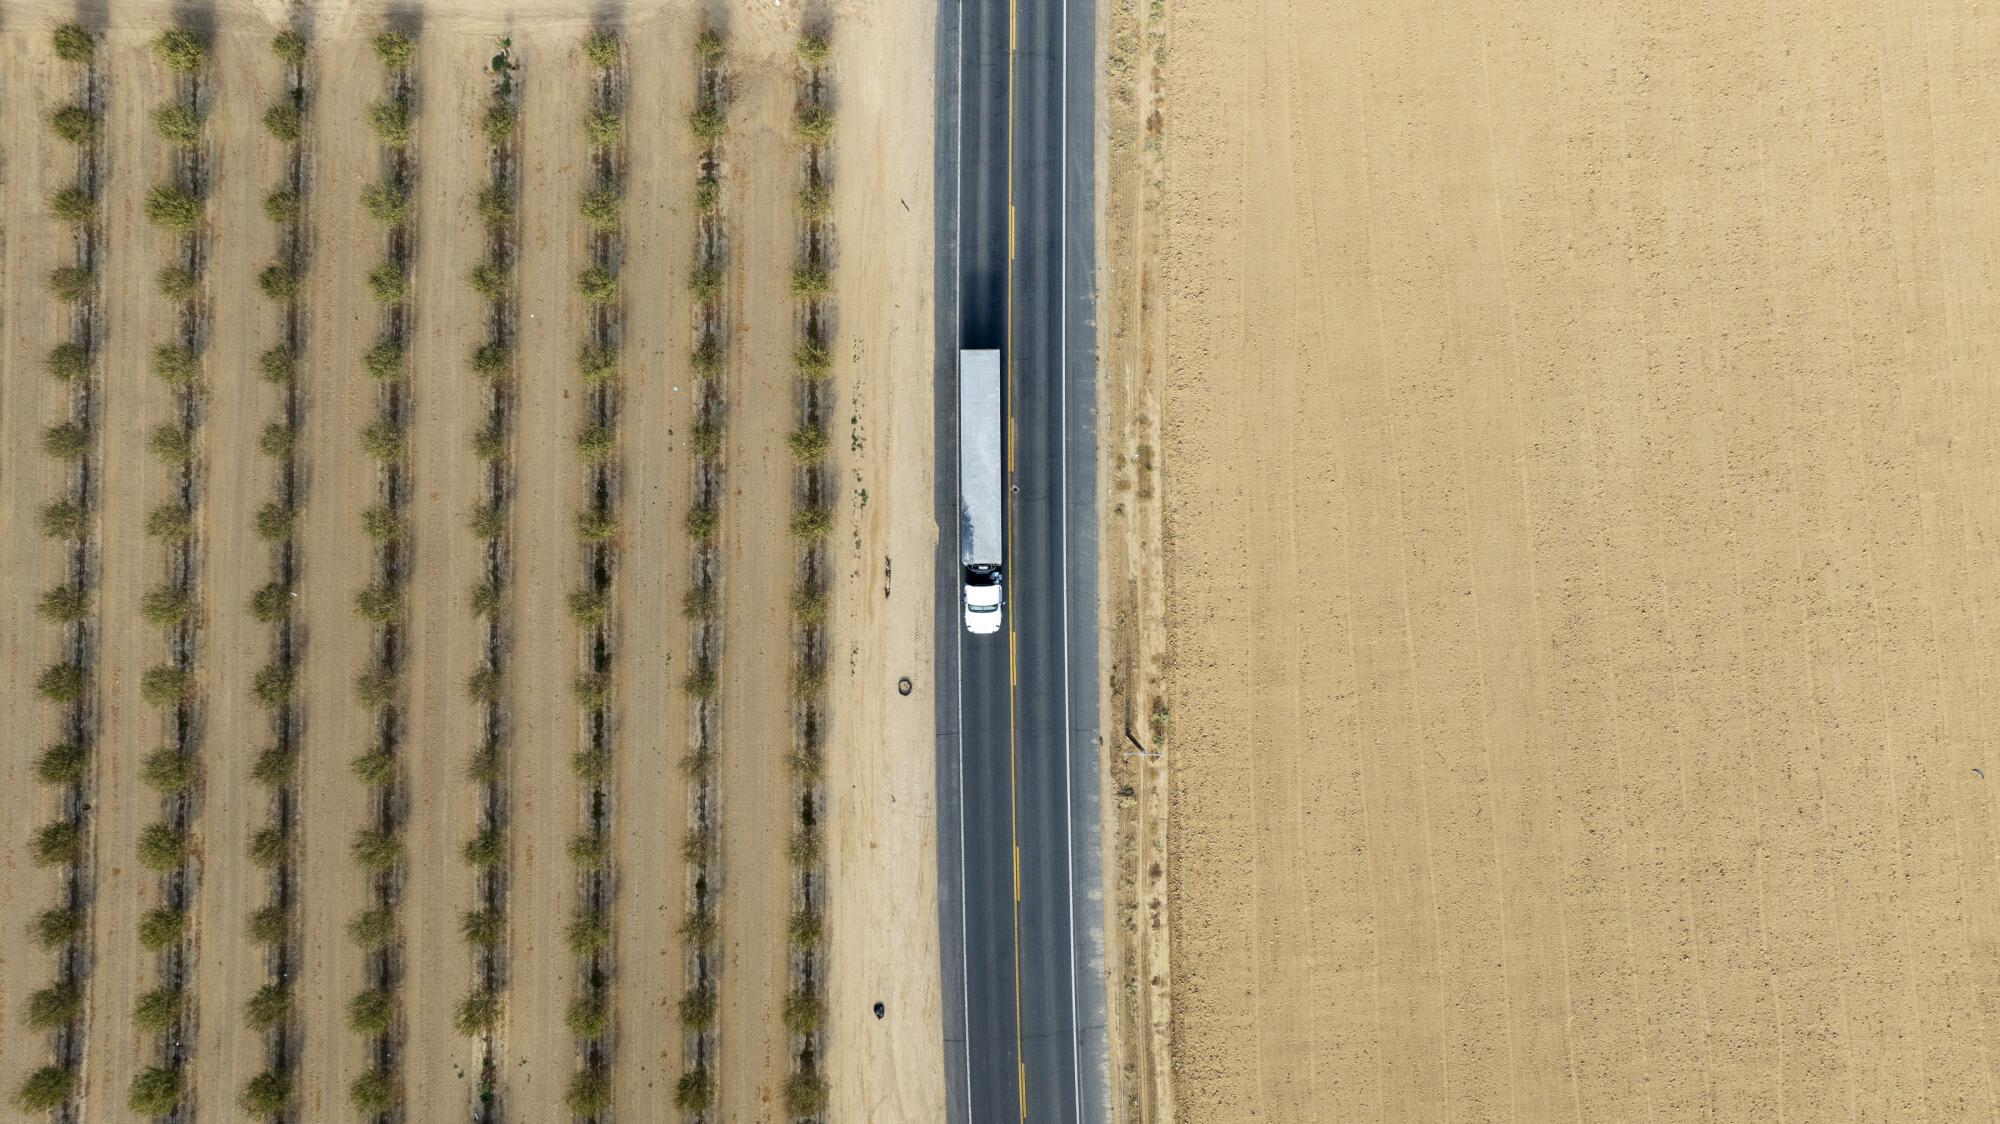 Aerial view of a tractor trailer on a paved road  driving between farmland plots.